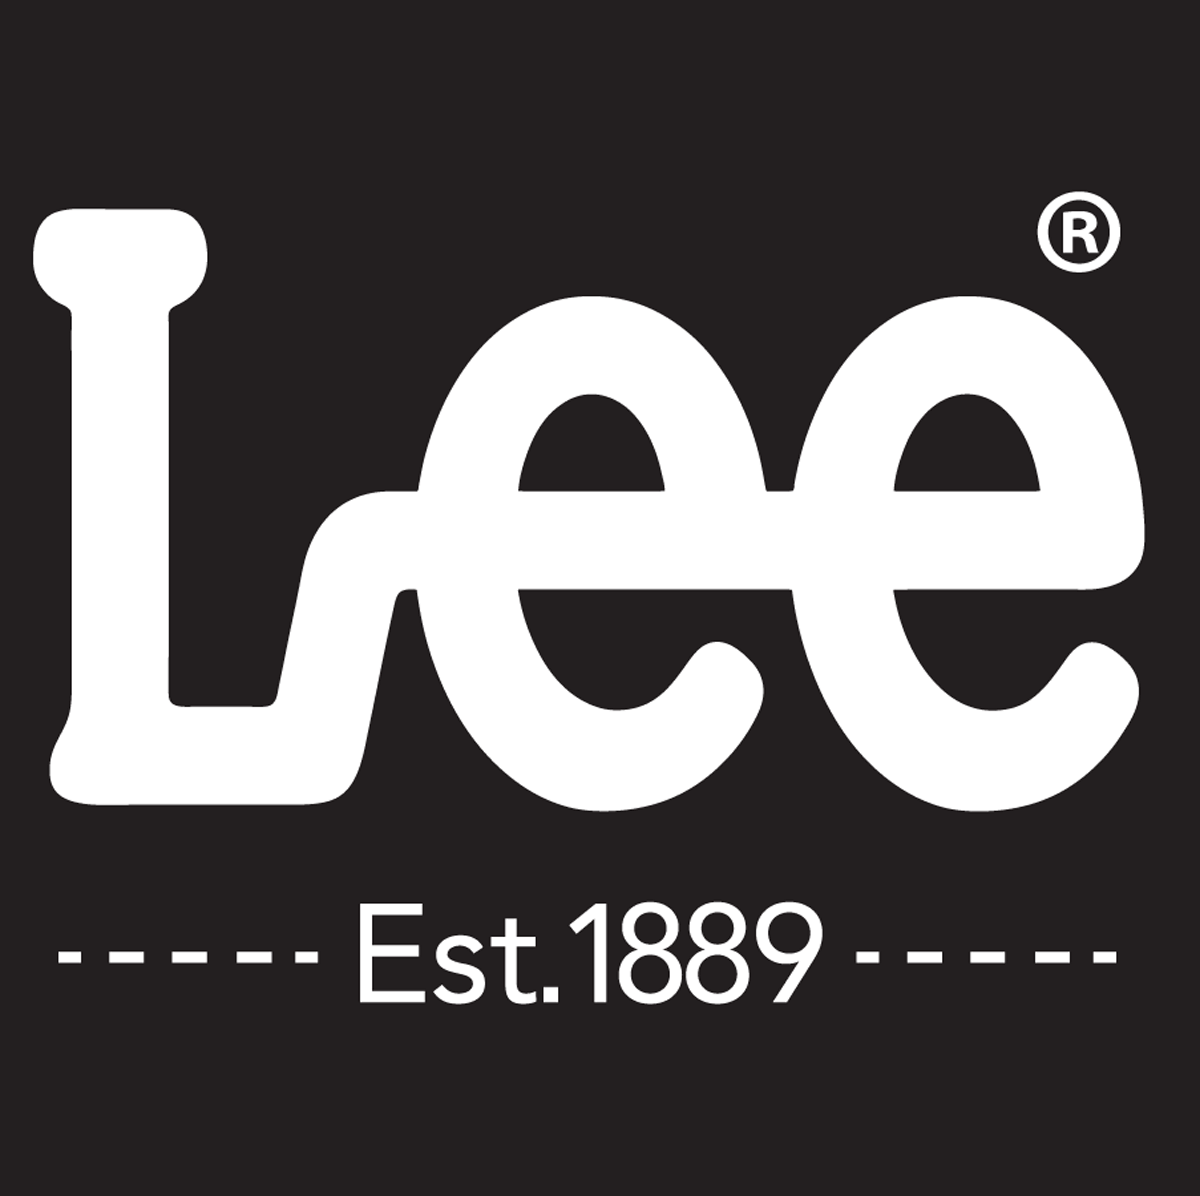 lee jeans coupons